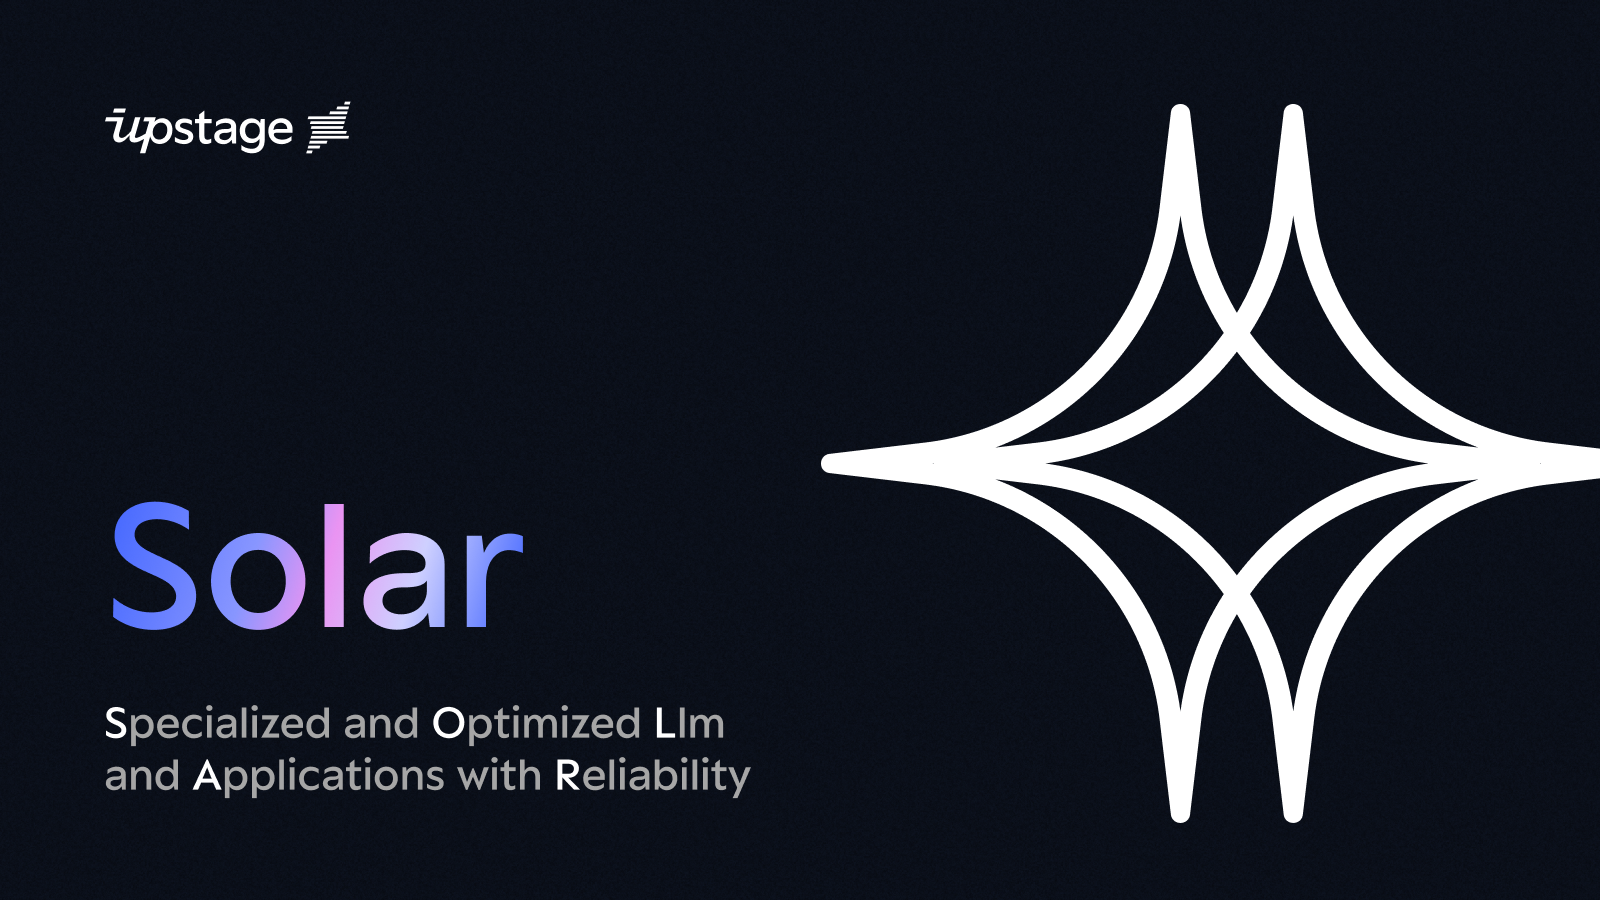 Upstage LLM 'SOLAR' registered as the main official model for Poe, the world's best generative AI platform